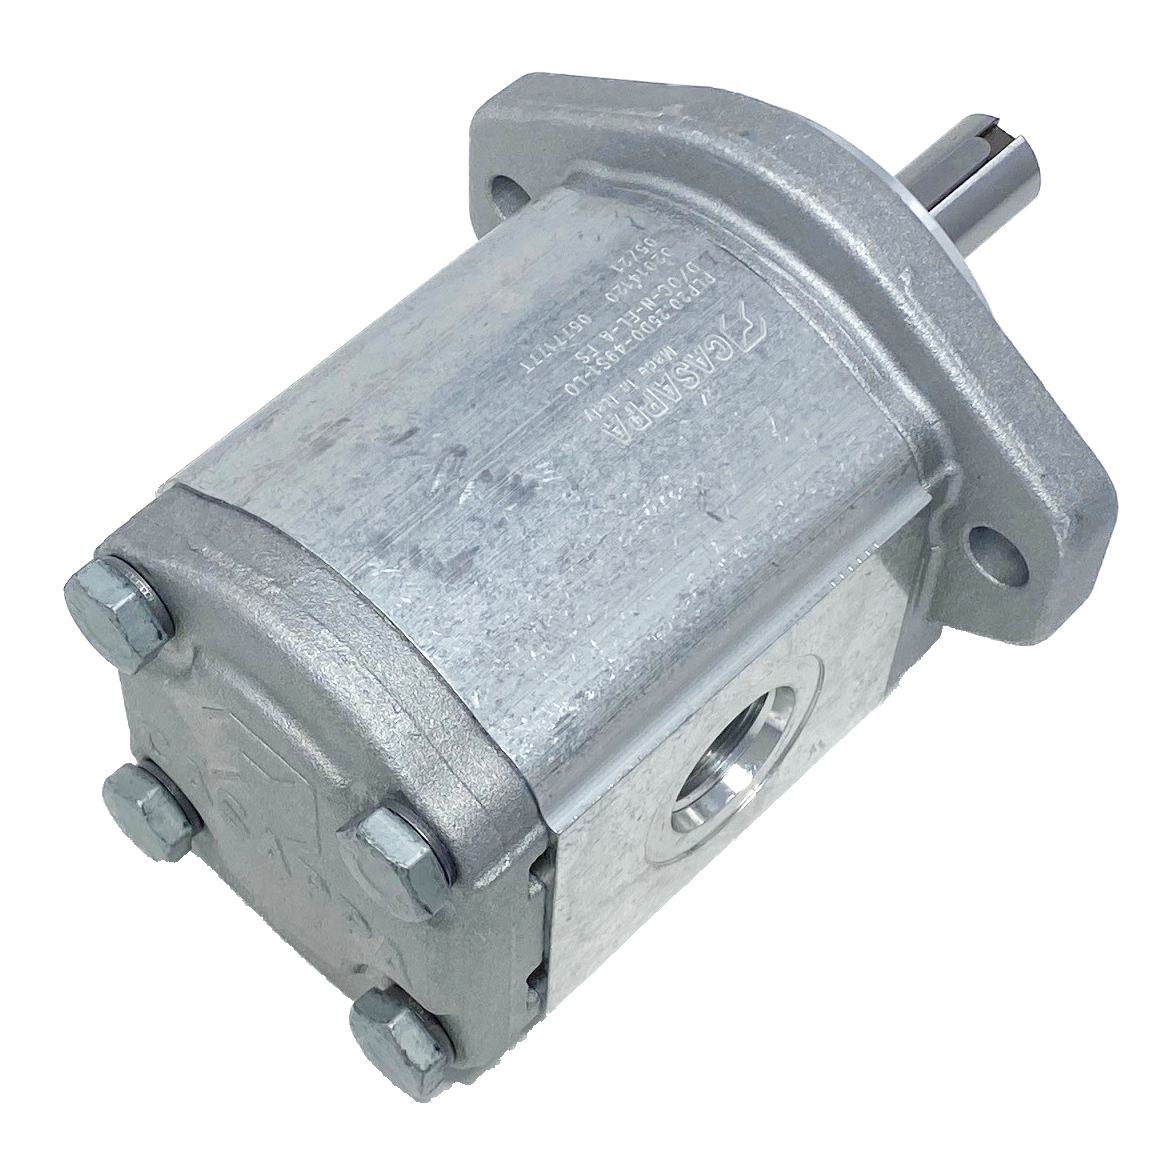 PHM20.25B0-49S9-LOC/OG-N-EL : Casappa Polaris Gear Motor, 26.42cc, 3335psi Rated, 3000RPM, Reversible Interior Drain, 3/4" Bore x 3/16" Key Shaft, SAE A 2-Bolt Flange, 0.625 (5/8") #10 SAE Inlet, 1.25" #20 SAE Outlet, Cast Iron Body, Aluminum Flange